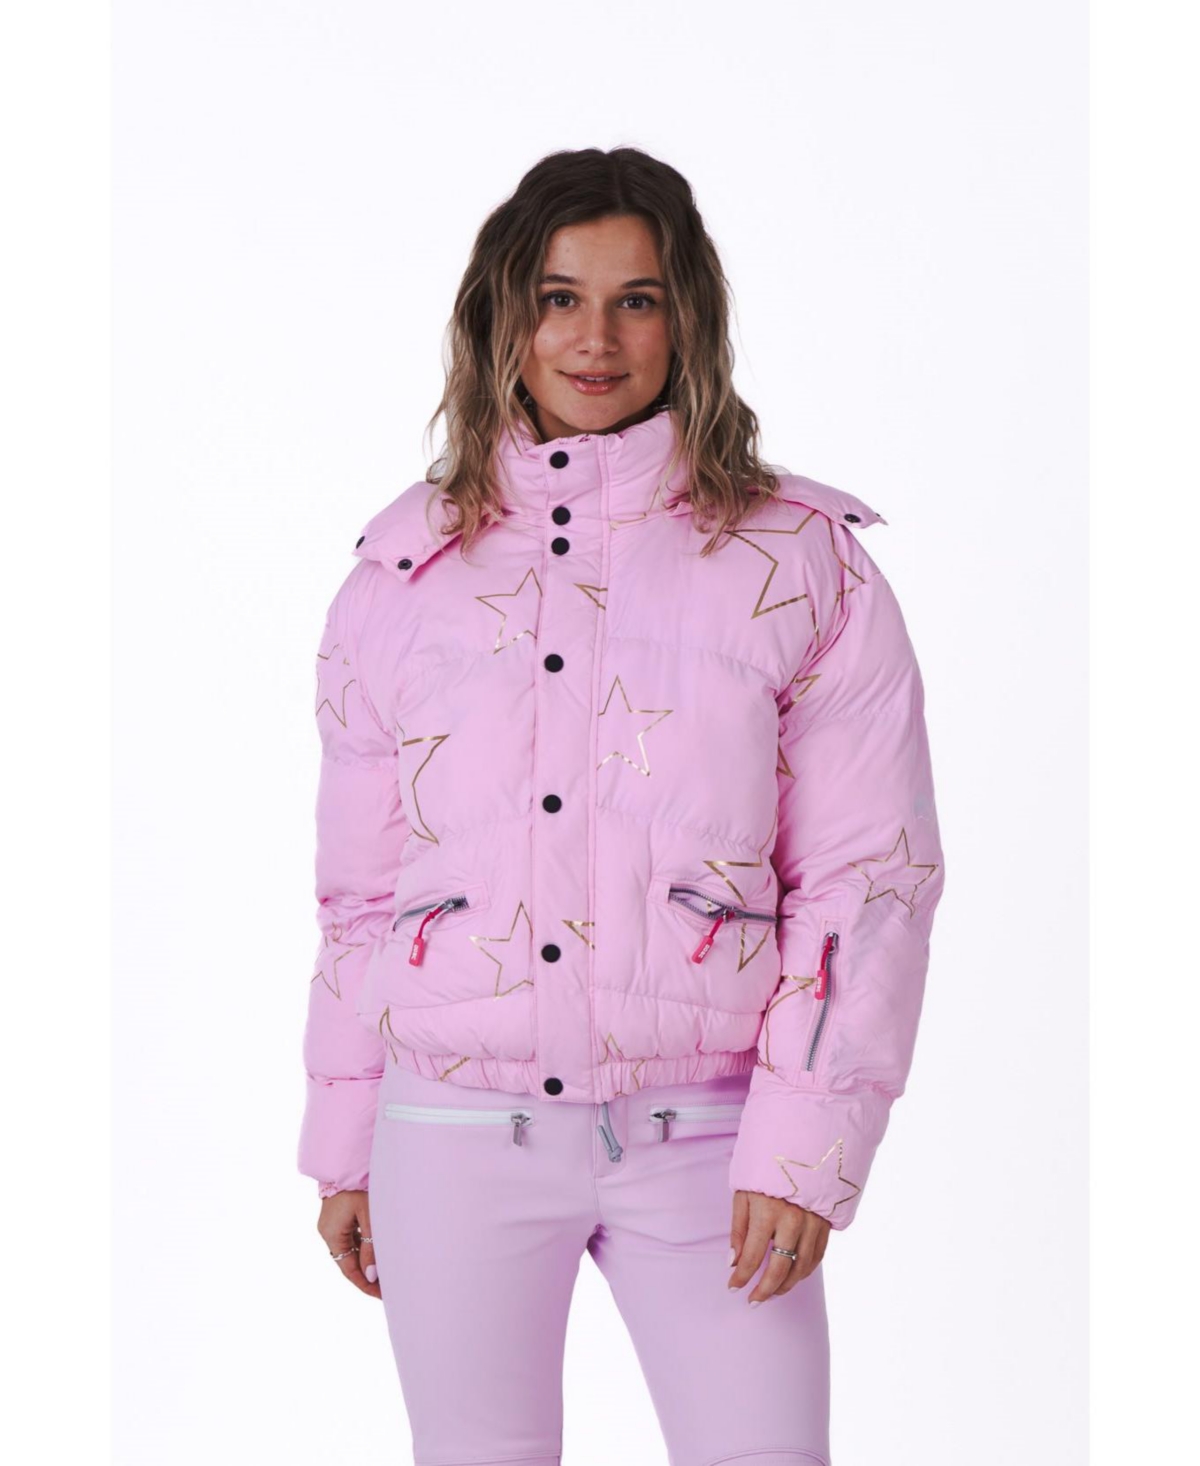 Women's Pink with Stars Chic Puffer Jacket - Pink